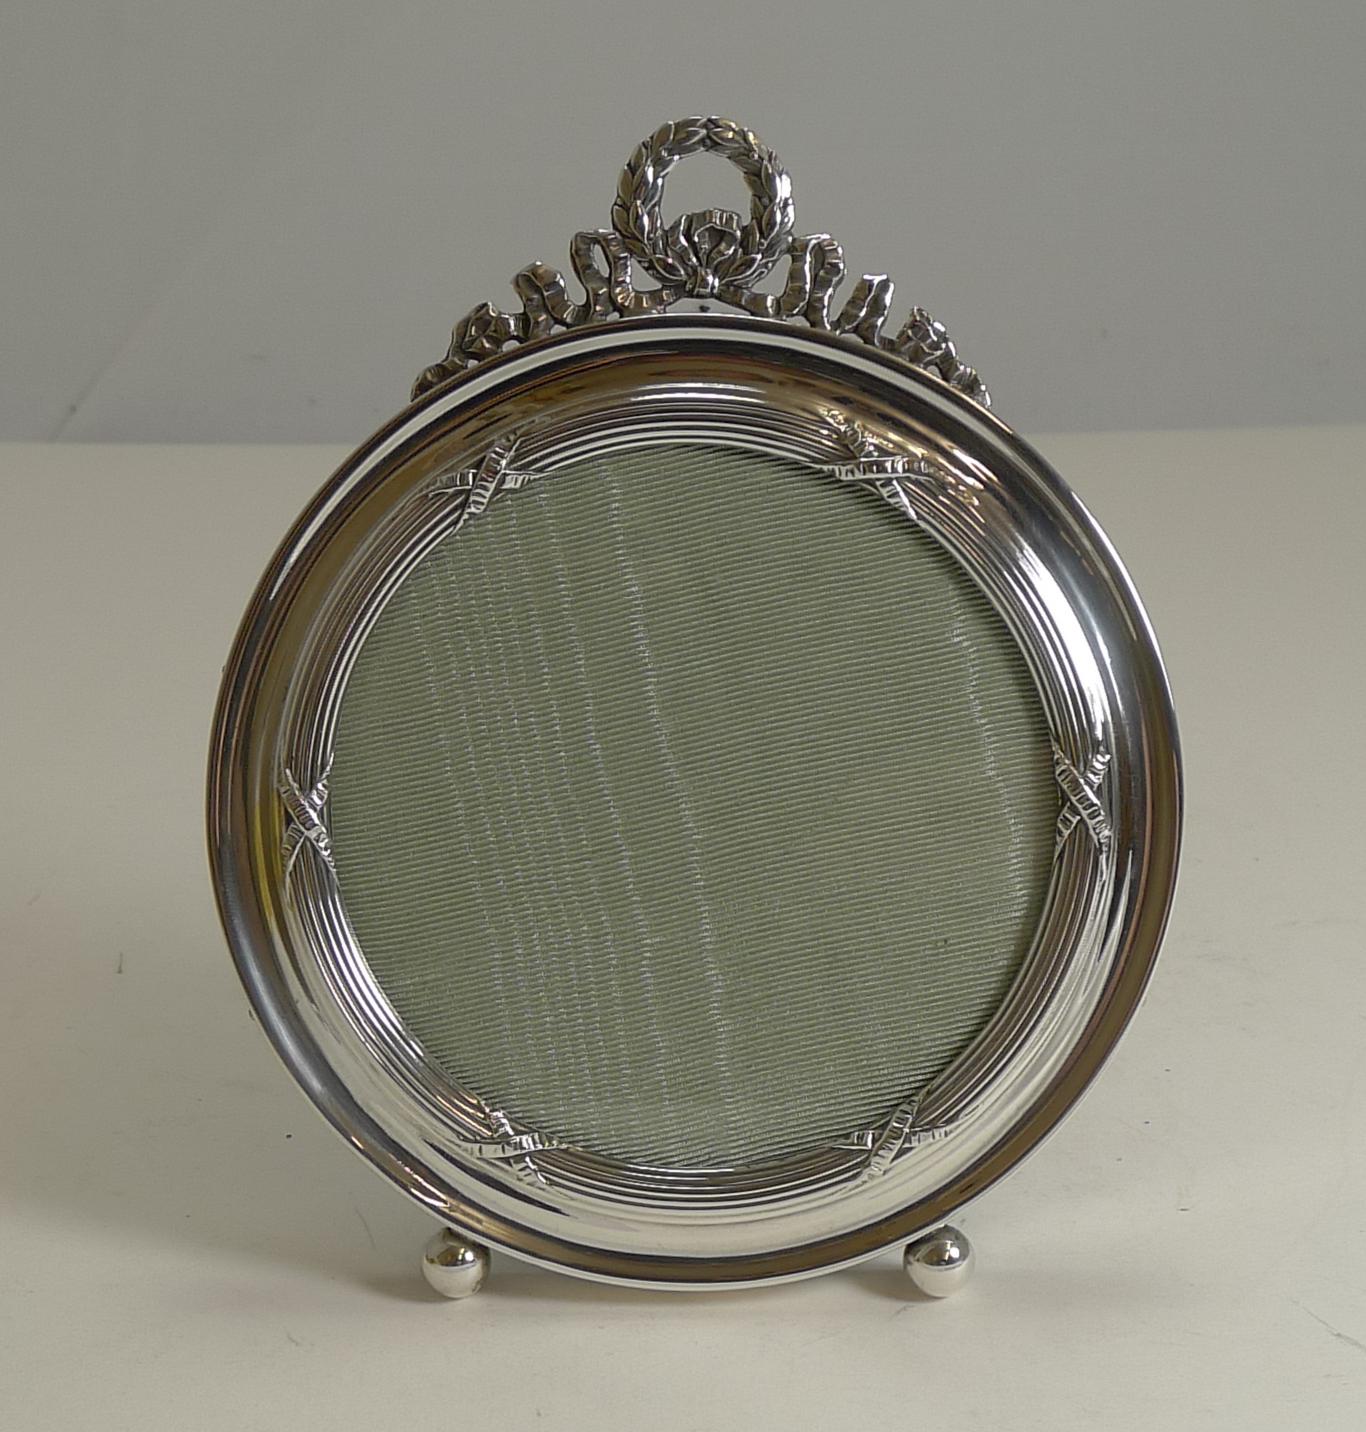 Pretty as a picture, the English Edwardian photograph frame is made from English sterling silver fully hallmarked for Birmingham 1909 together with the makers mark for the well renowned silversmith, Henry Matthews.

The circular frame is decorated